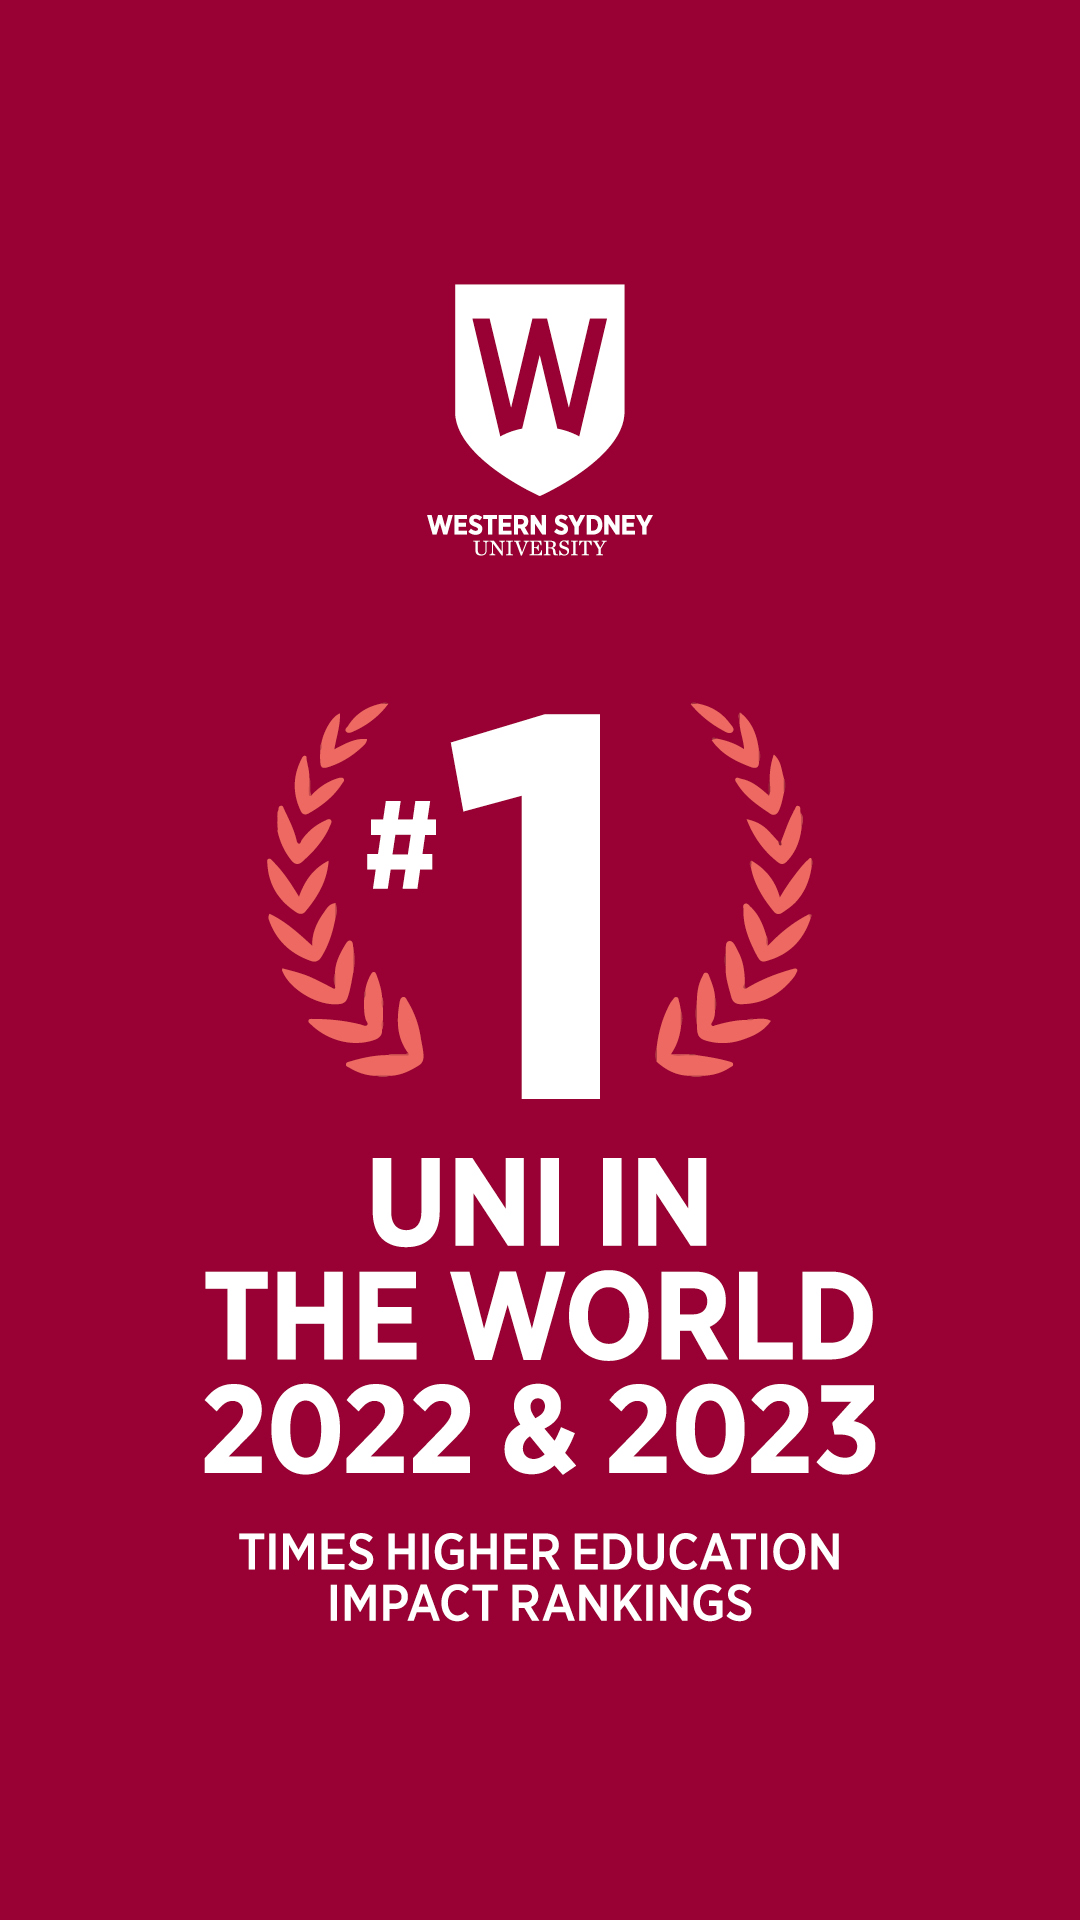 Ranked number 1 in the world for two years in a row in the Times Higher Education Impact Rankings 2022-2023 